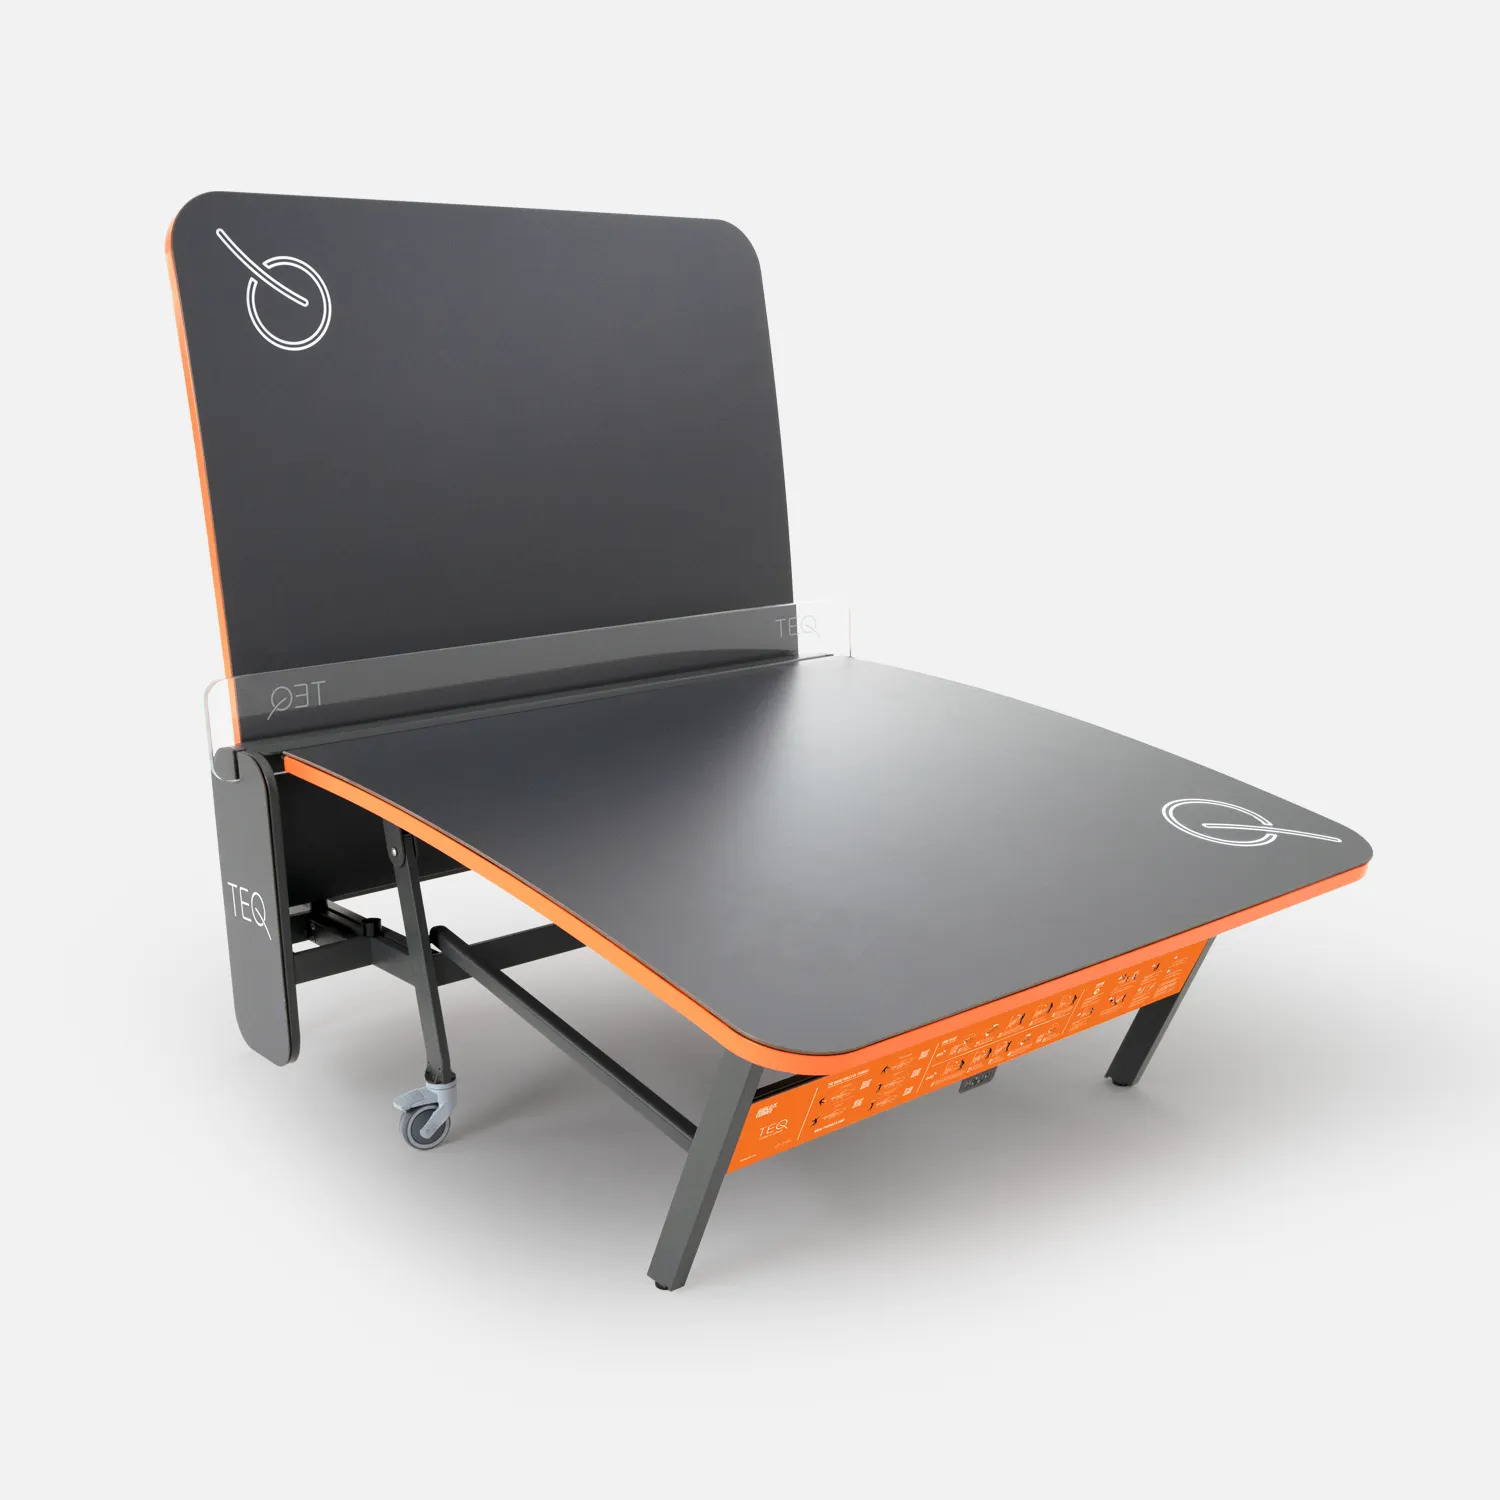 Teq Smart Table 